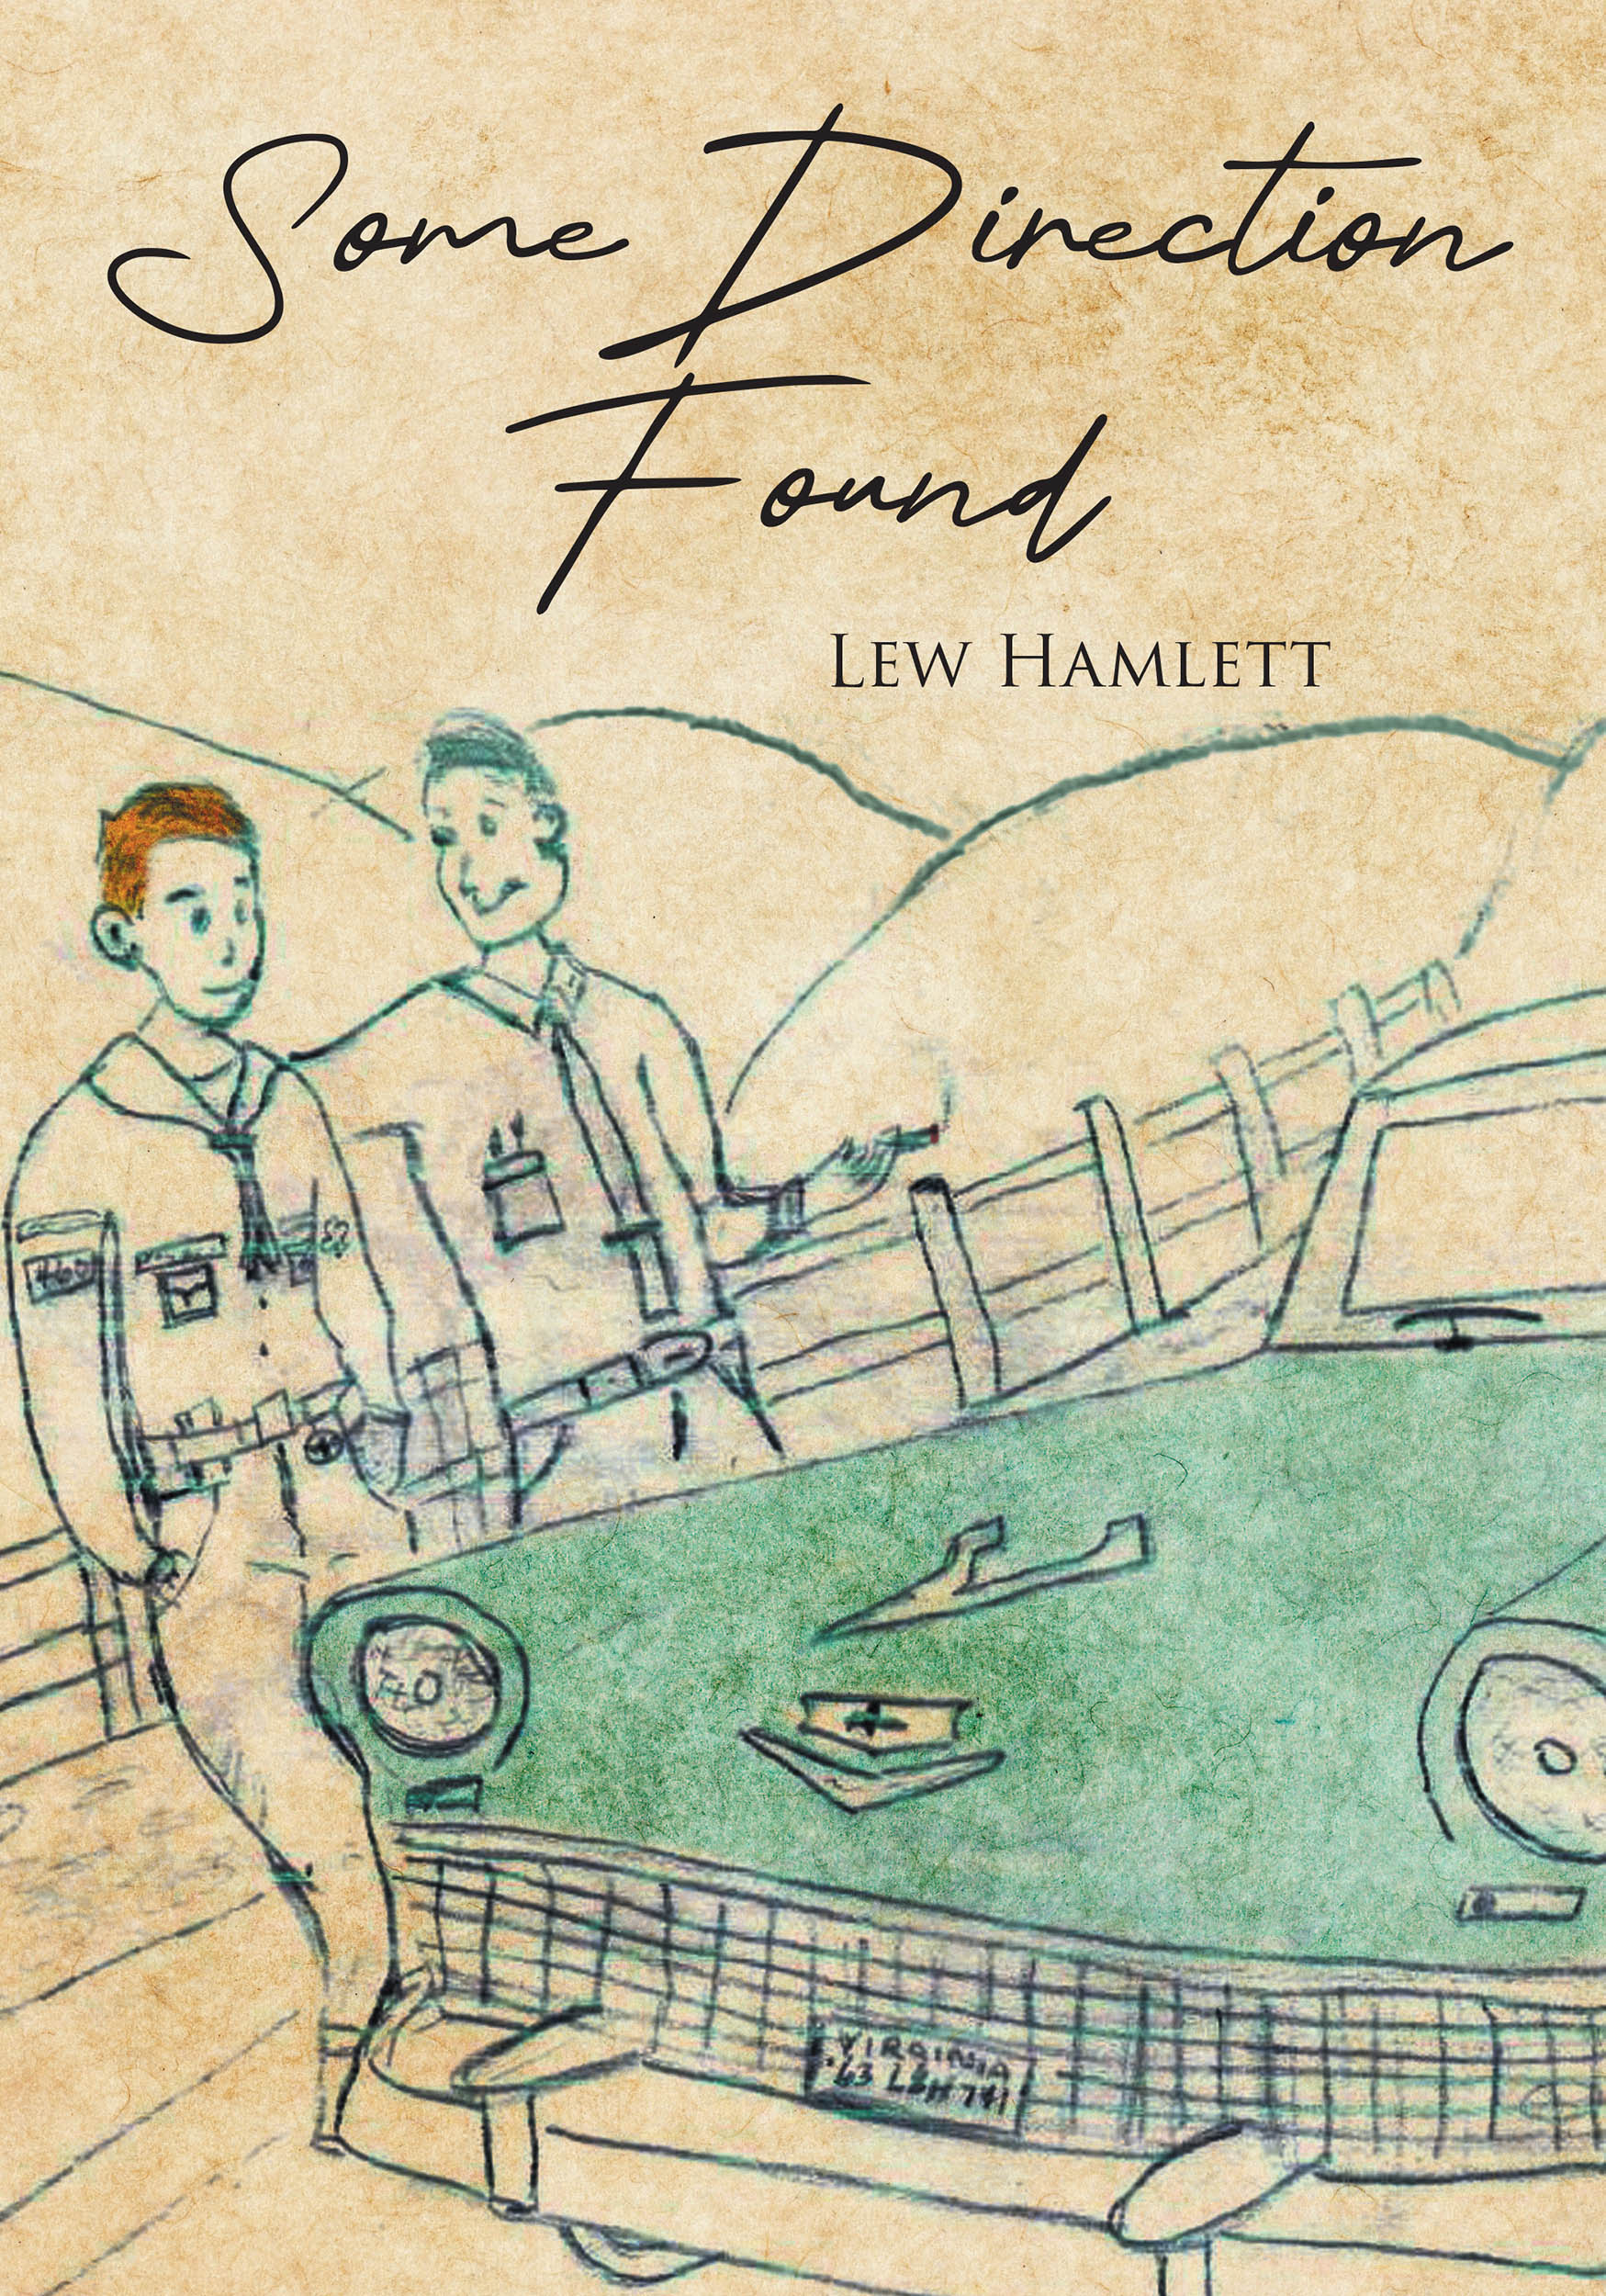 Author Lew Hamlett’s New Book, "Some Direction Found," is a Unique and Thoughtful Memoir That Takes Readers Into the Author’s Upbringing in the Maryland and D.C. Area